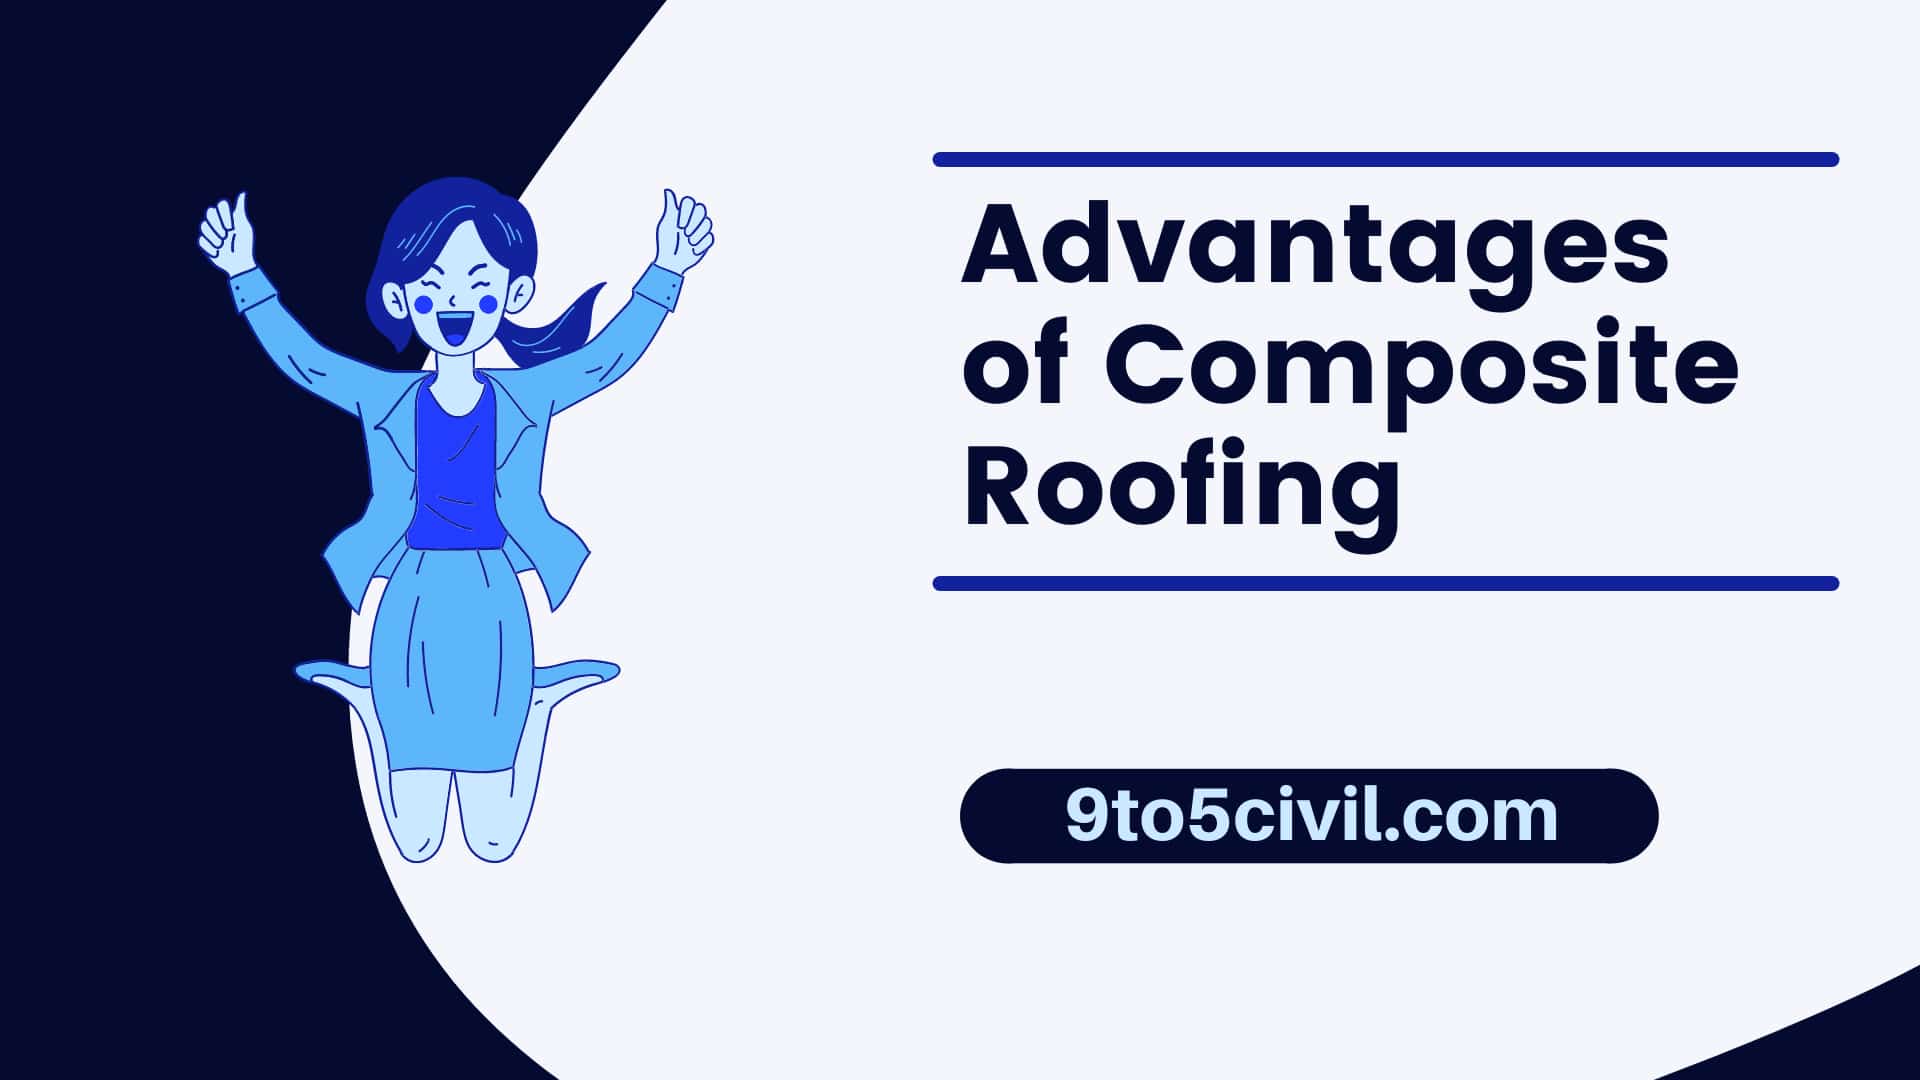 Advantages of Composite Roofing